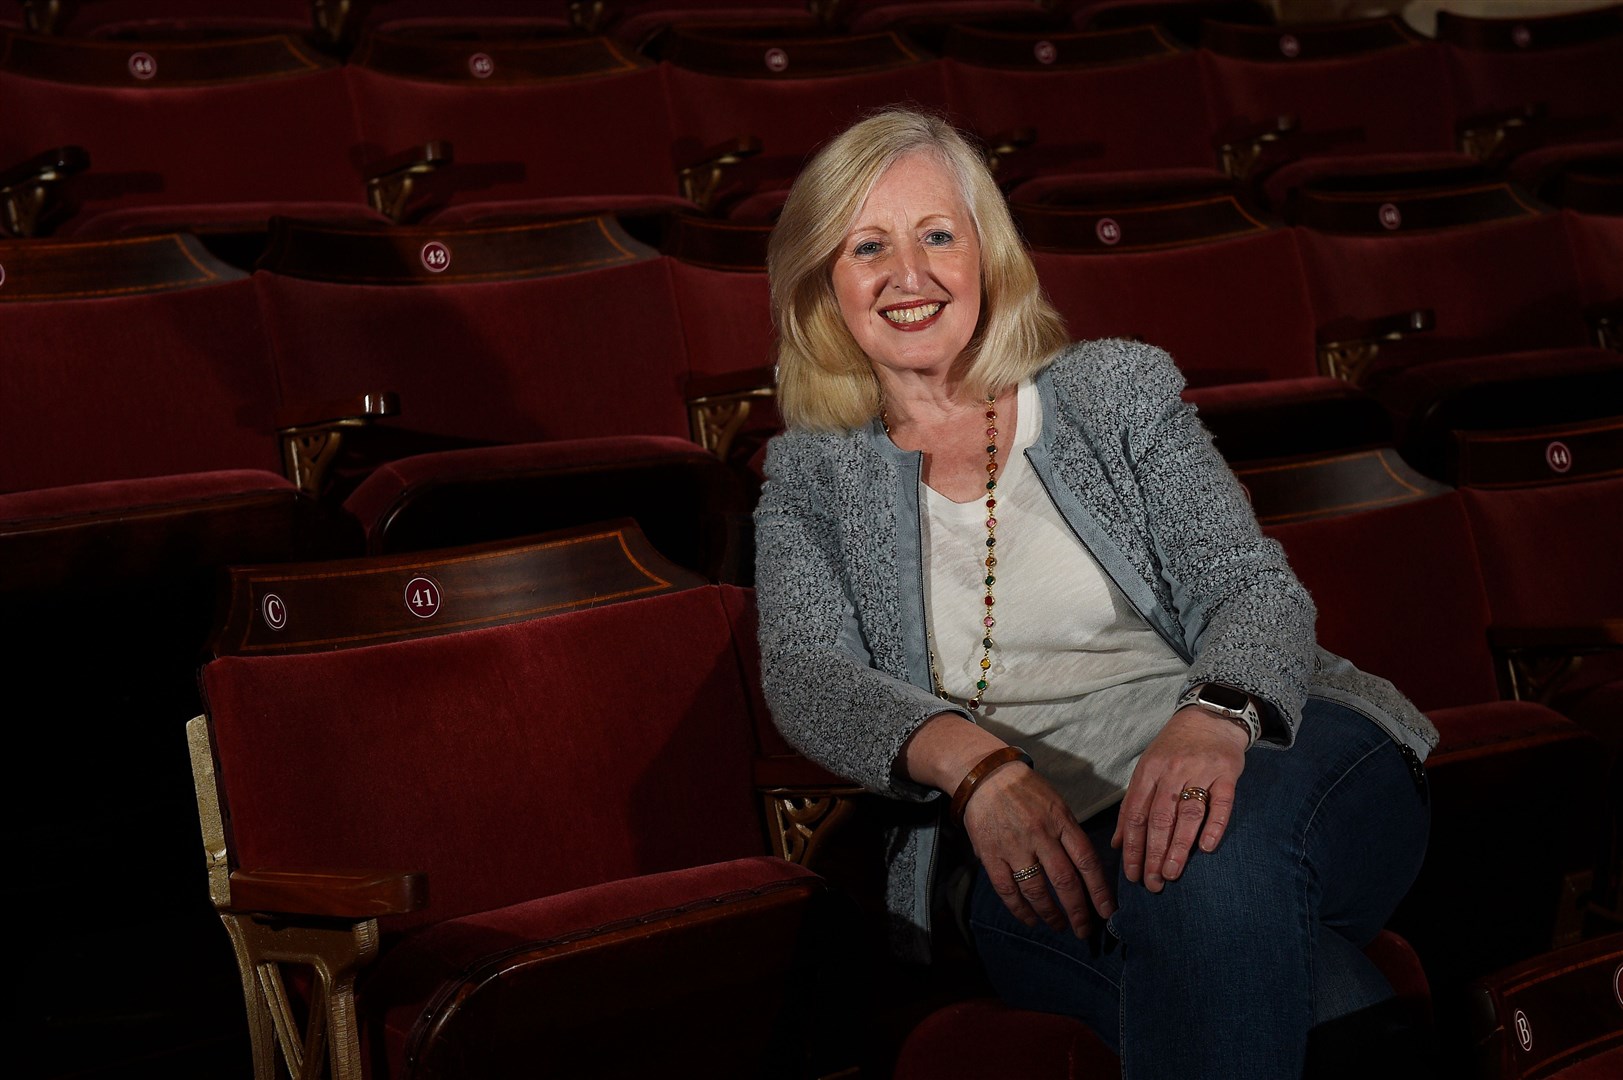 Fiona Gibson says the theatre could close forever without additional funding (Greg MacVean/PA)